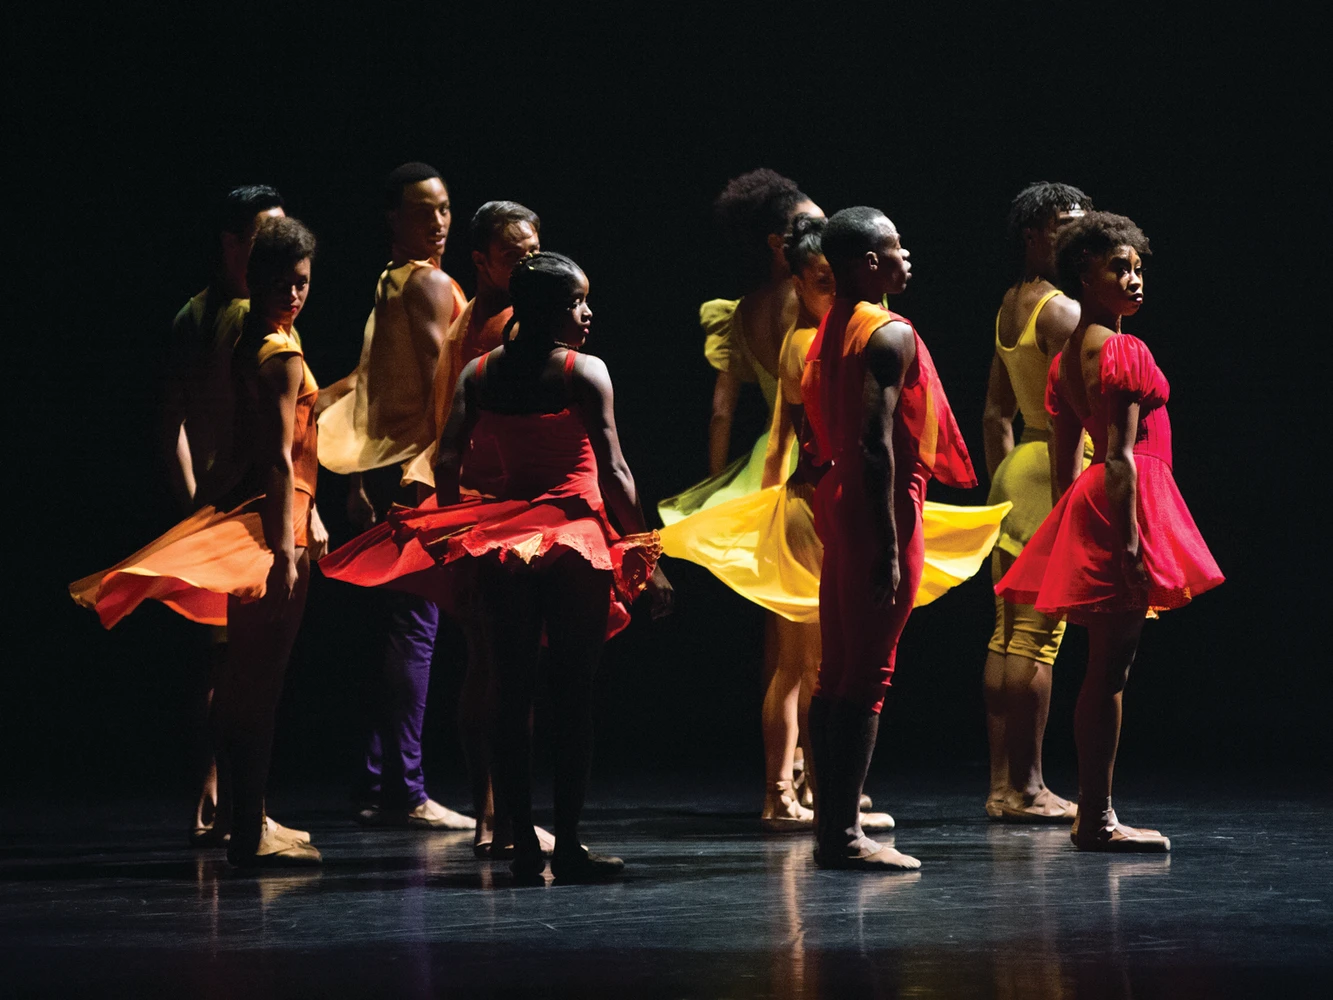 City Center Dance Festival: What to expect - 3